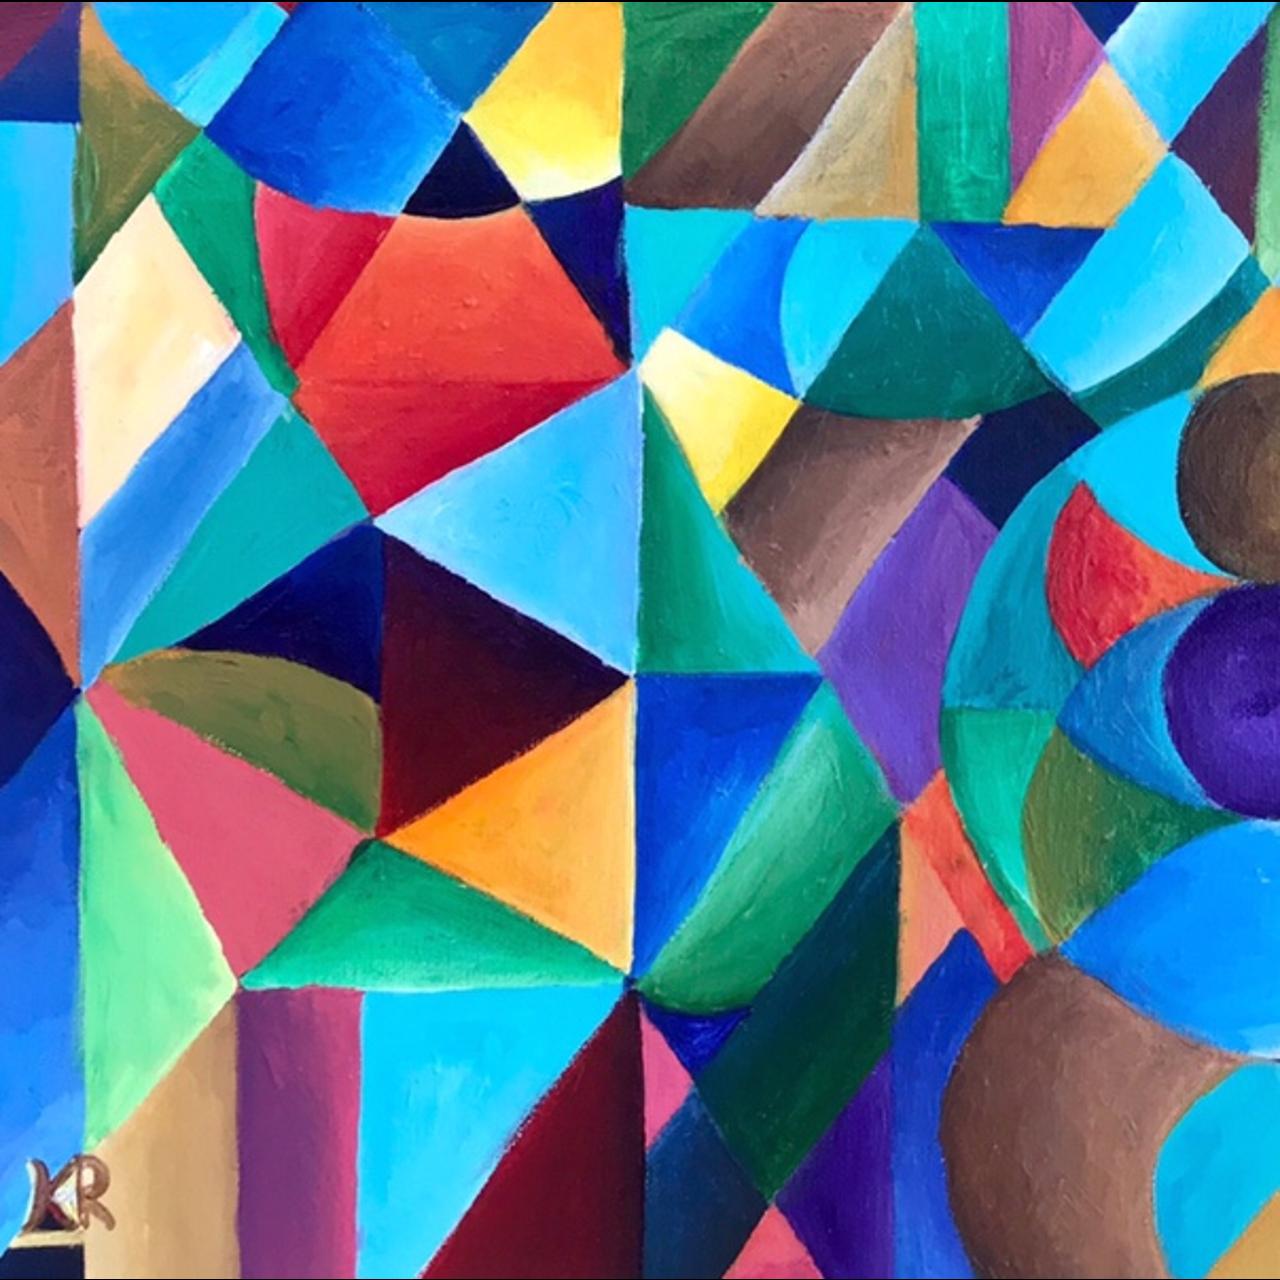 Geometric Art acrylic painting on 8 x 10 canvas by CanvasCoveArt